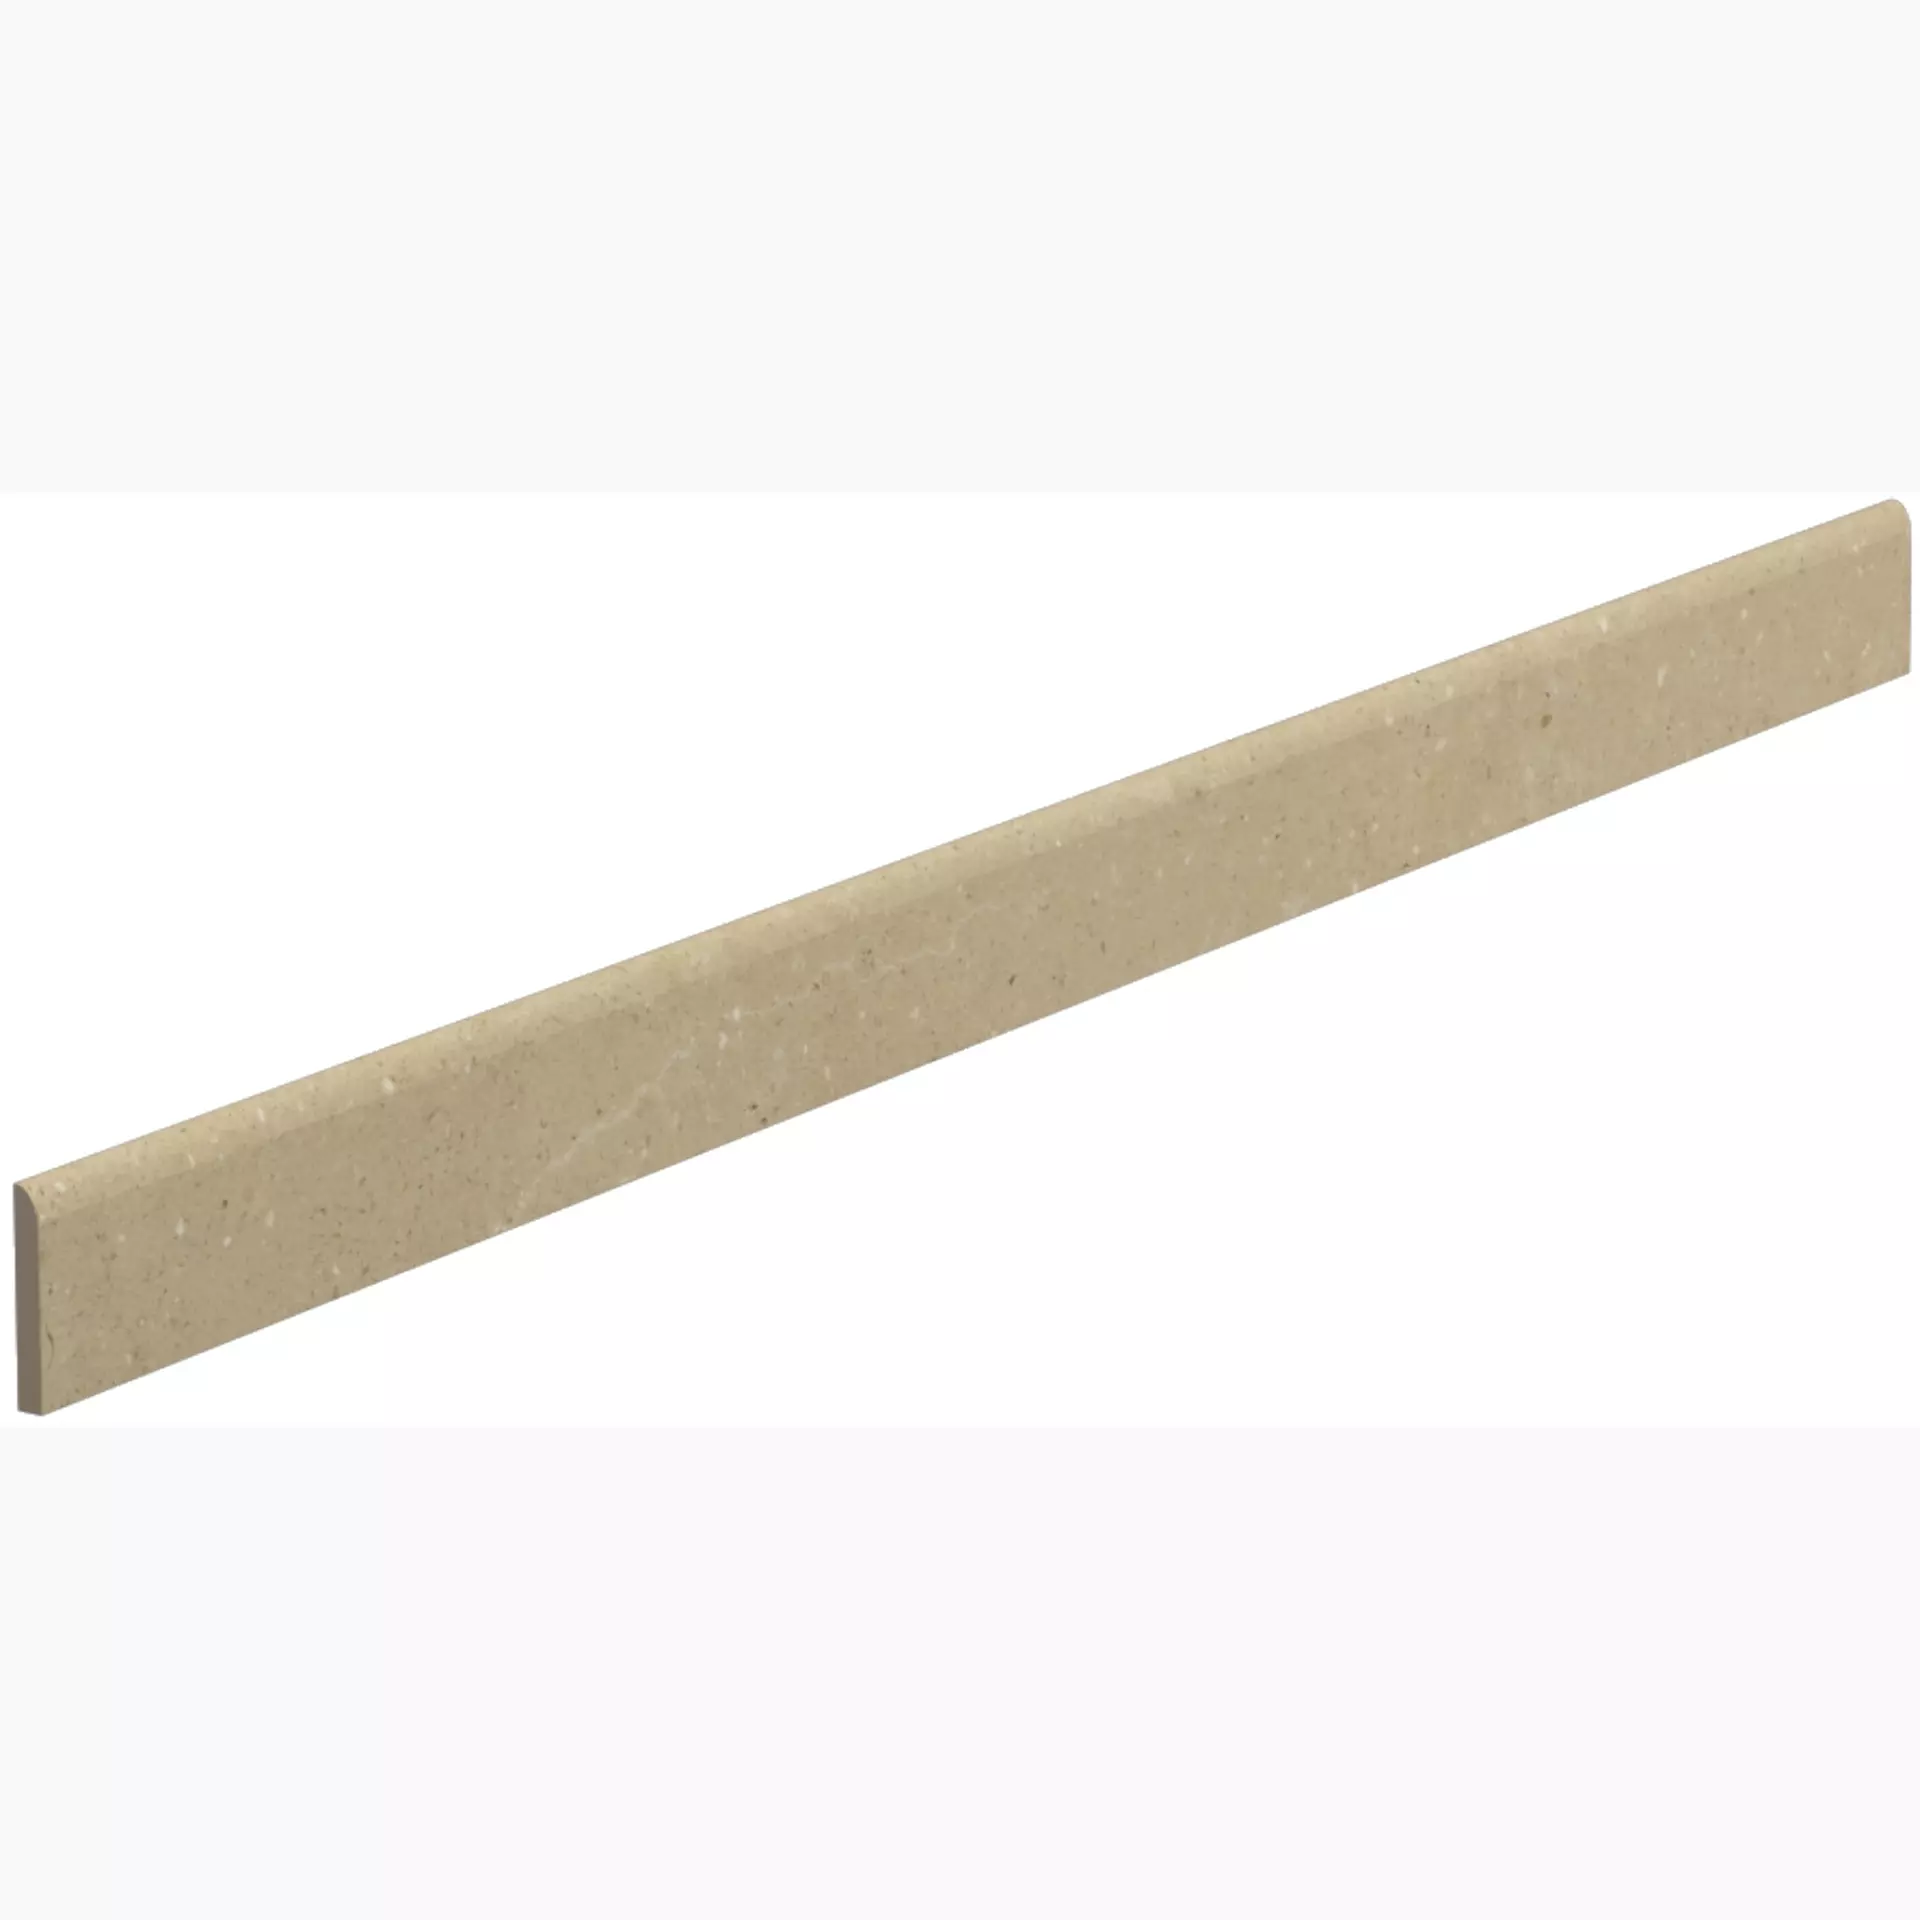 Del Conca Hwd Wild Beige Hwd01 Naturale Skirting board G0WD01R12 7x120cm rectified 8,5mm